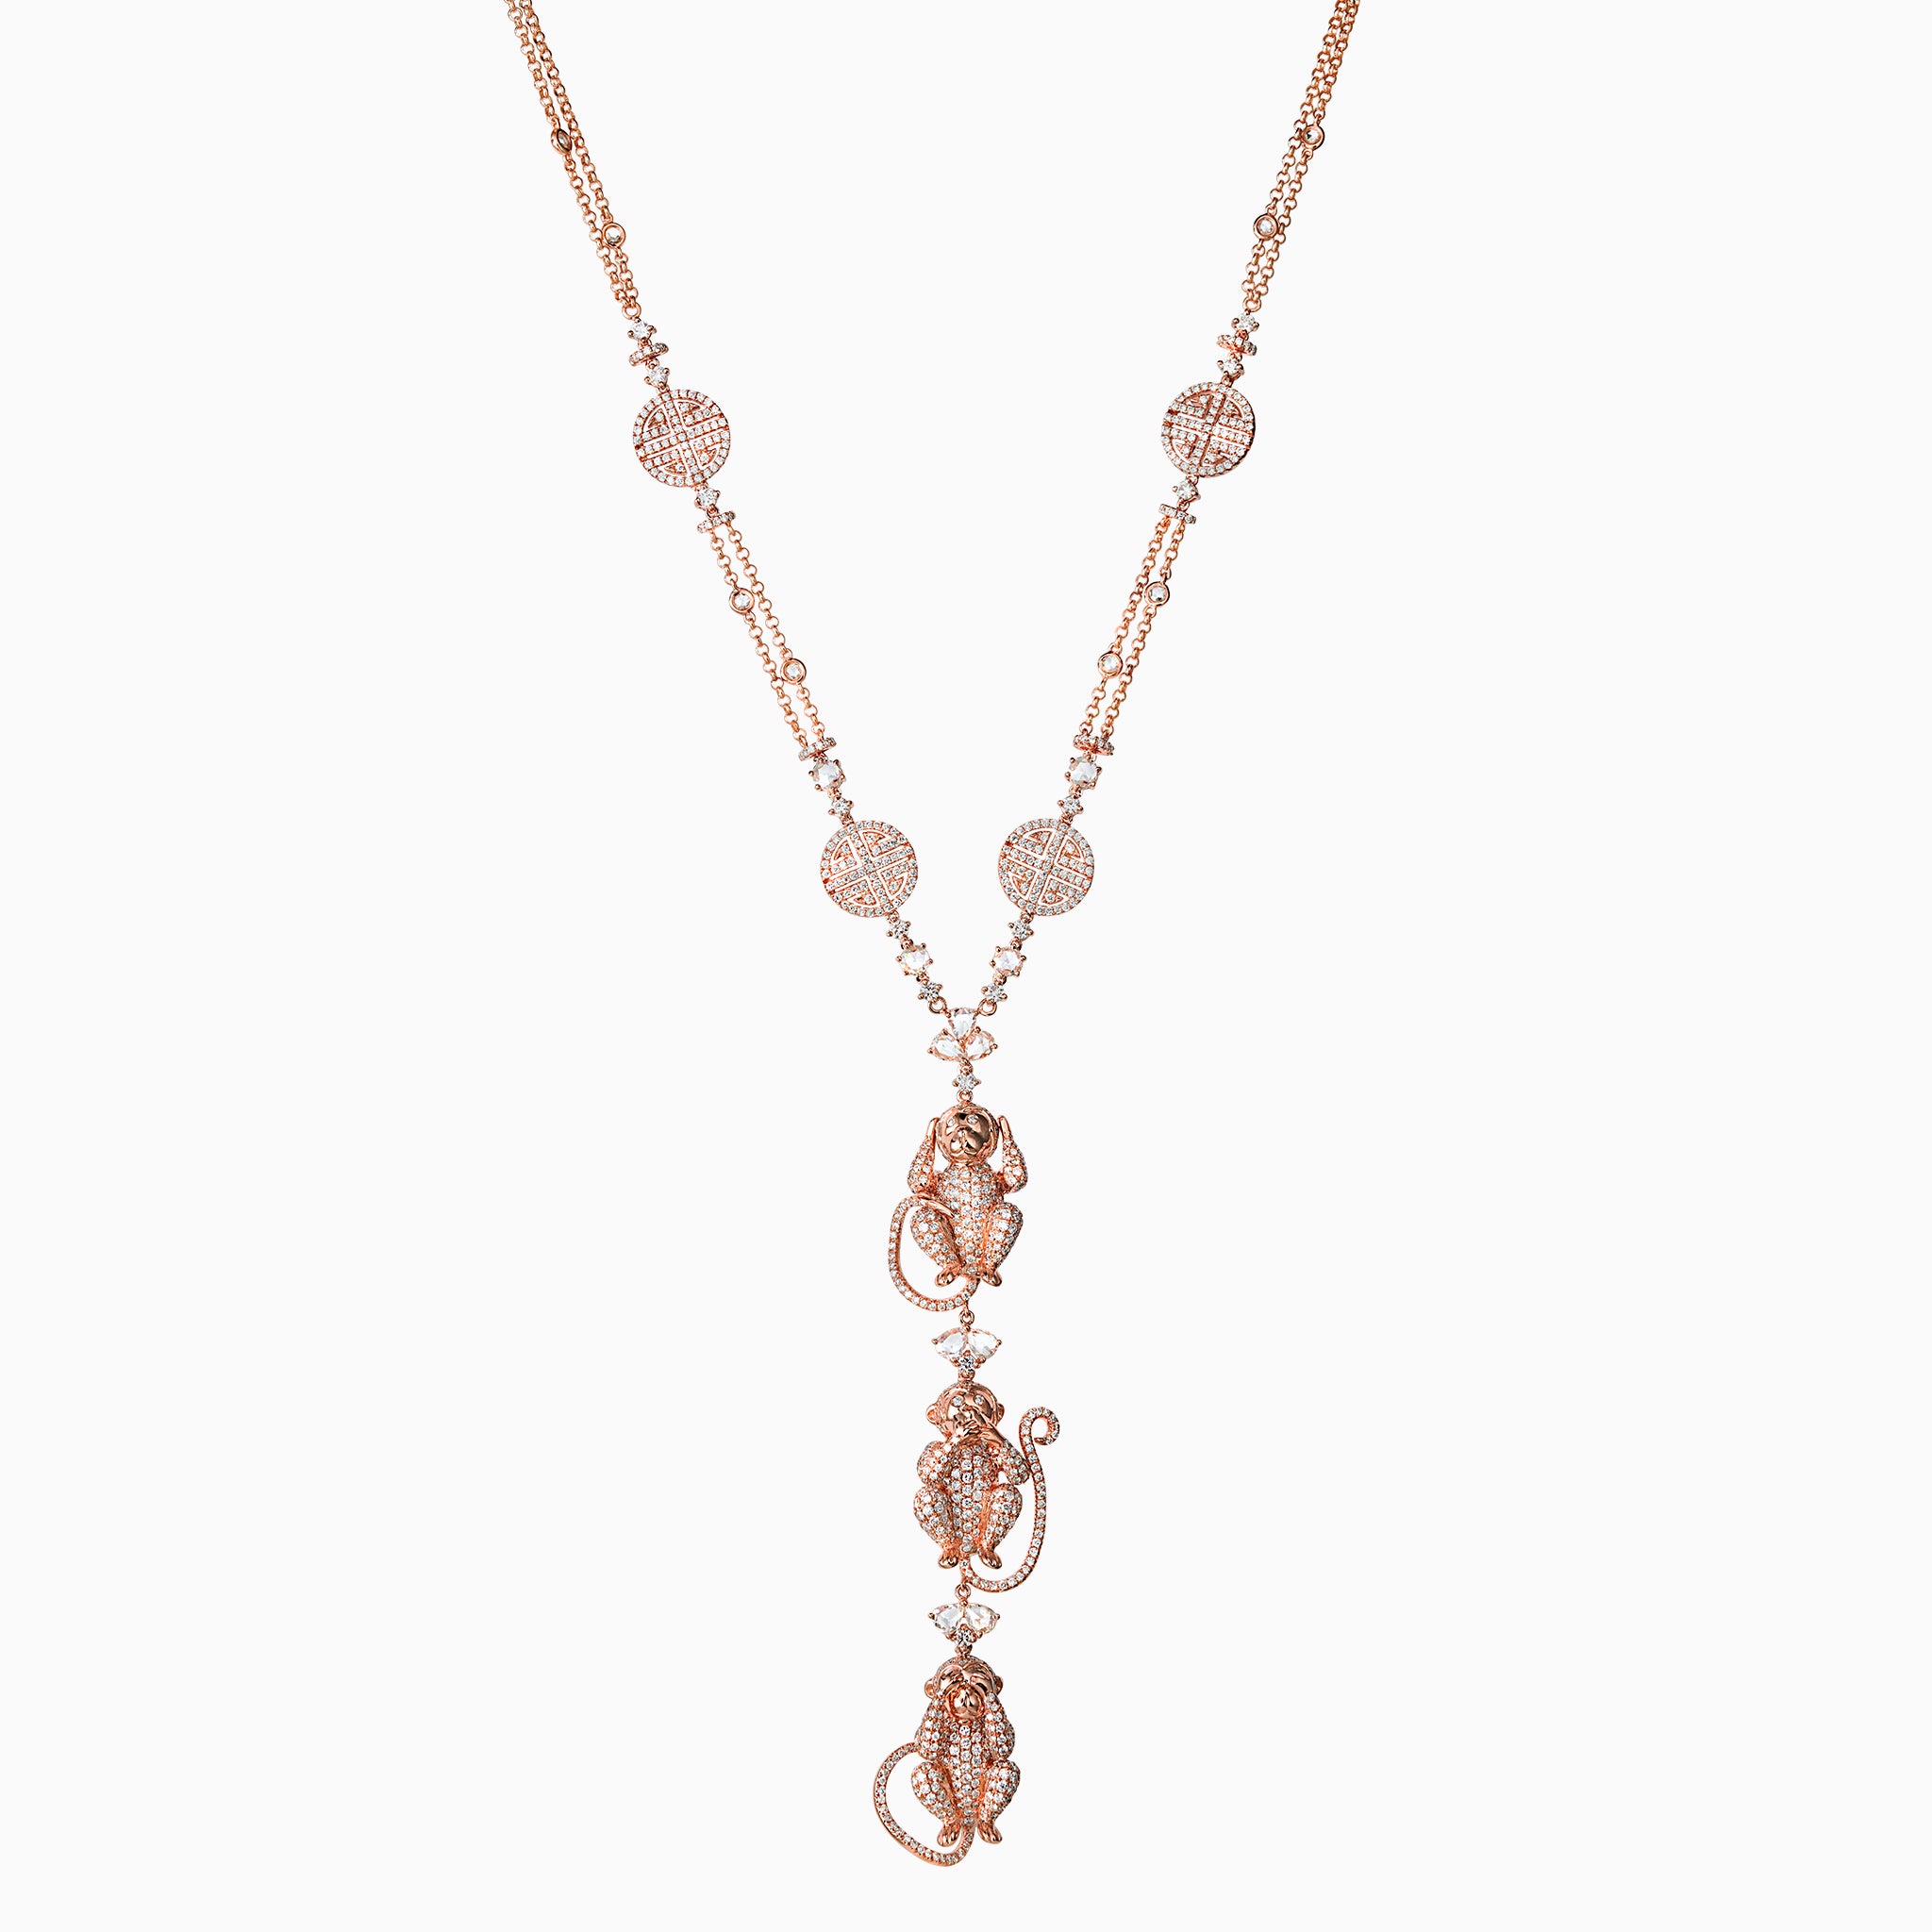 Lucky Monkey Necklace in Rose Gold